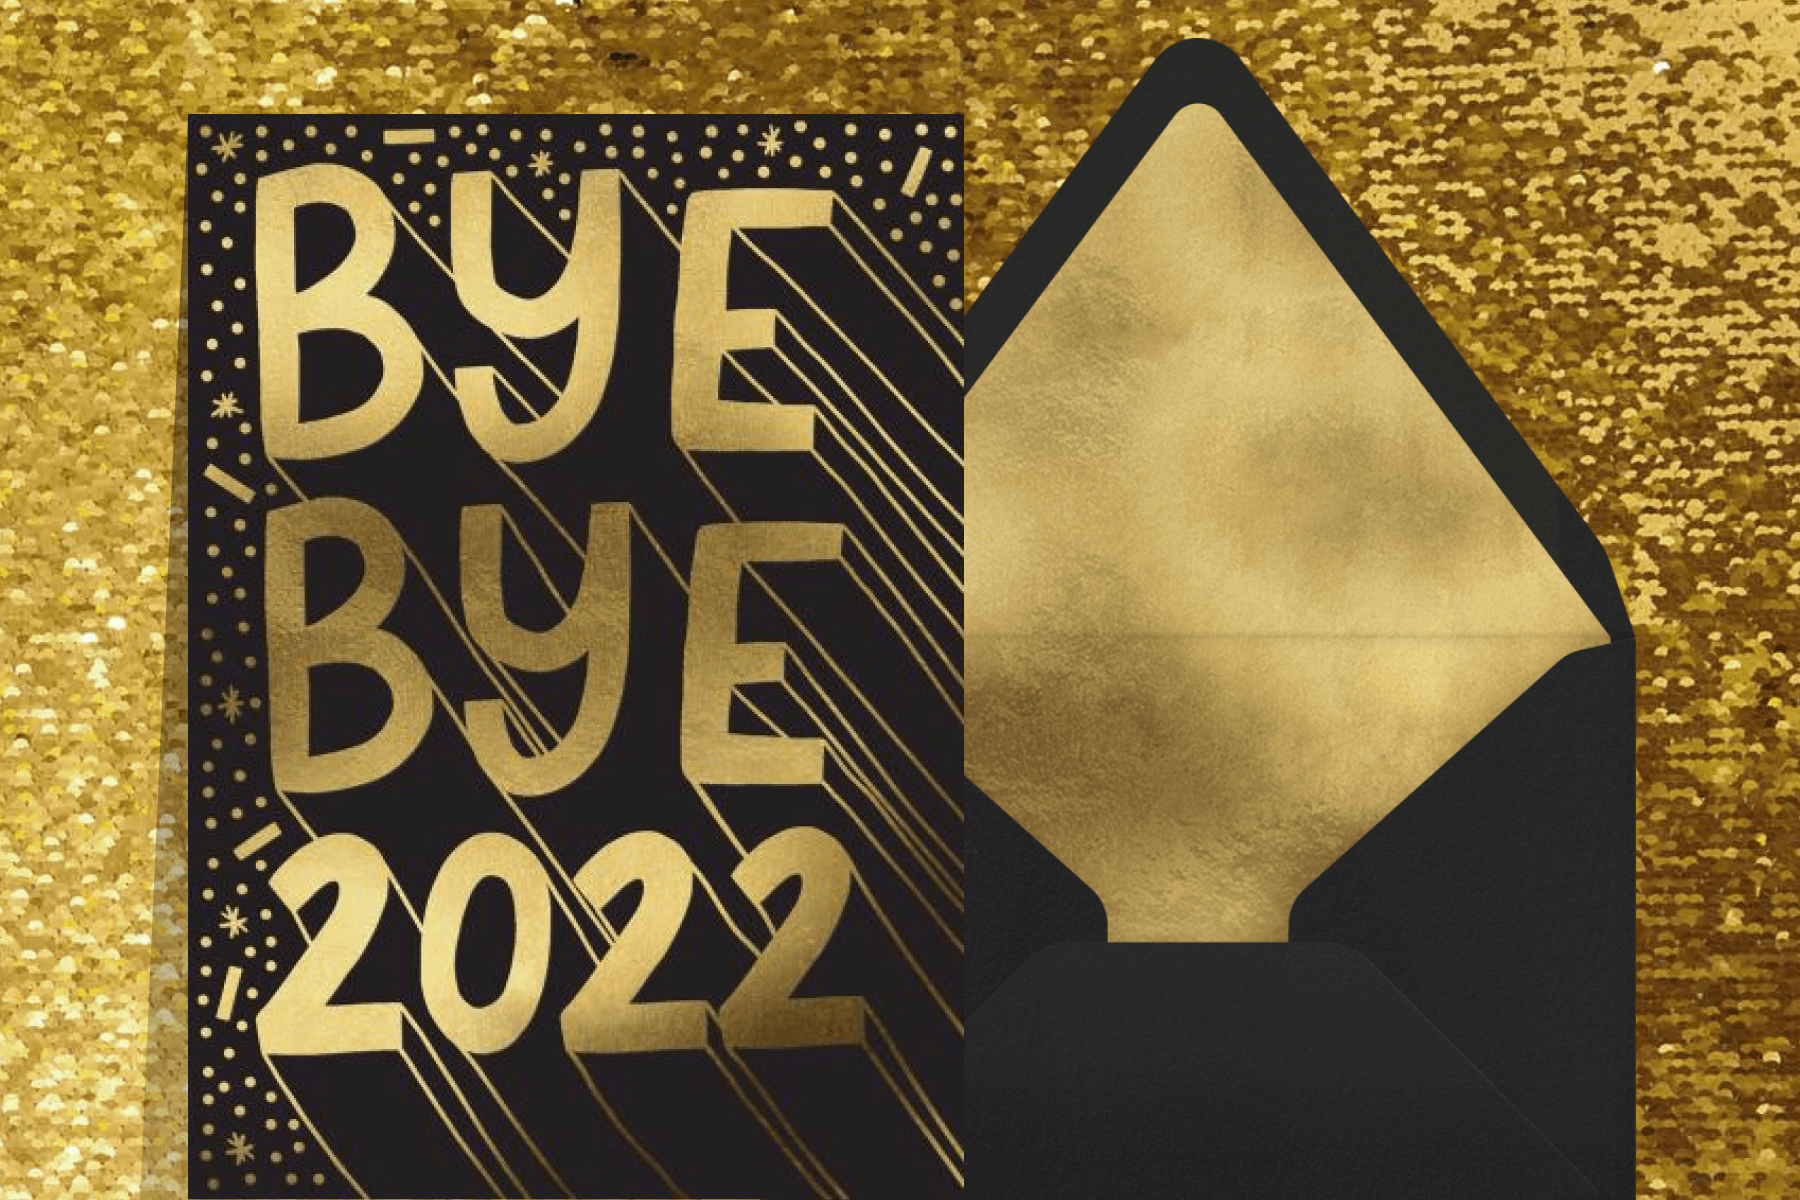 A black card reads “Bye Bye 2022” in large gold letters drawn with 3D perspective.